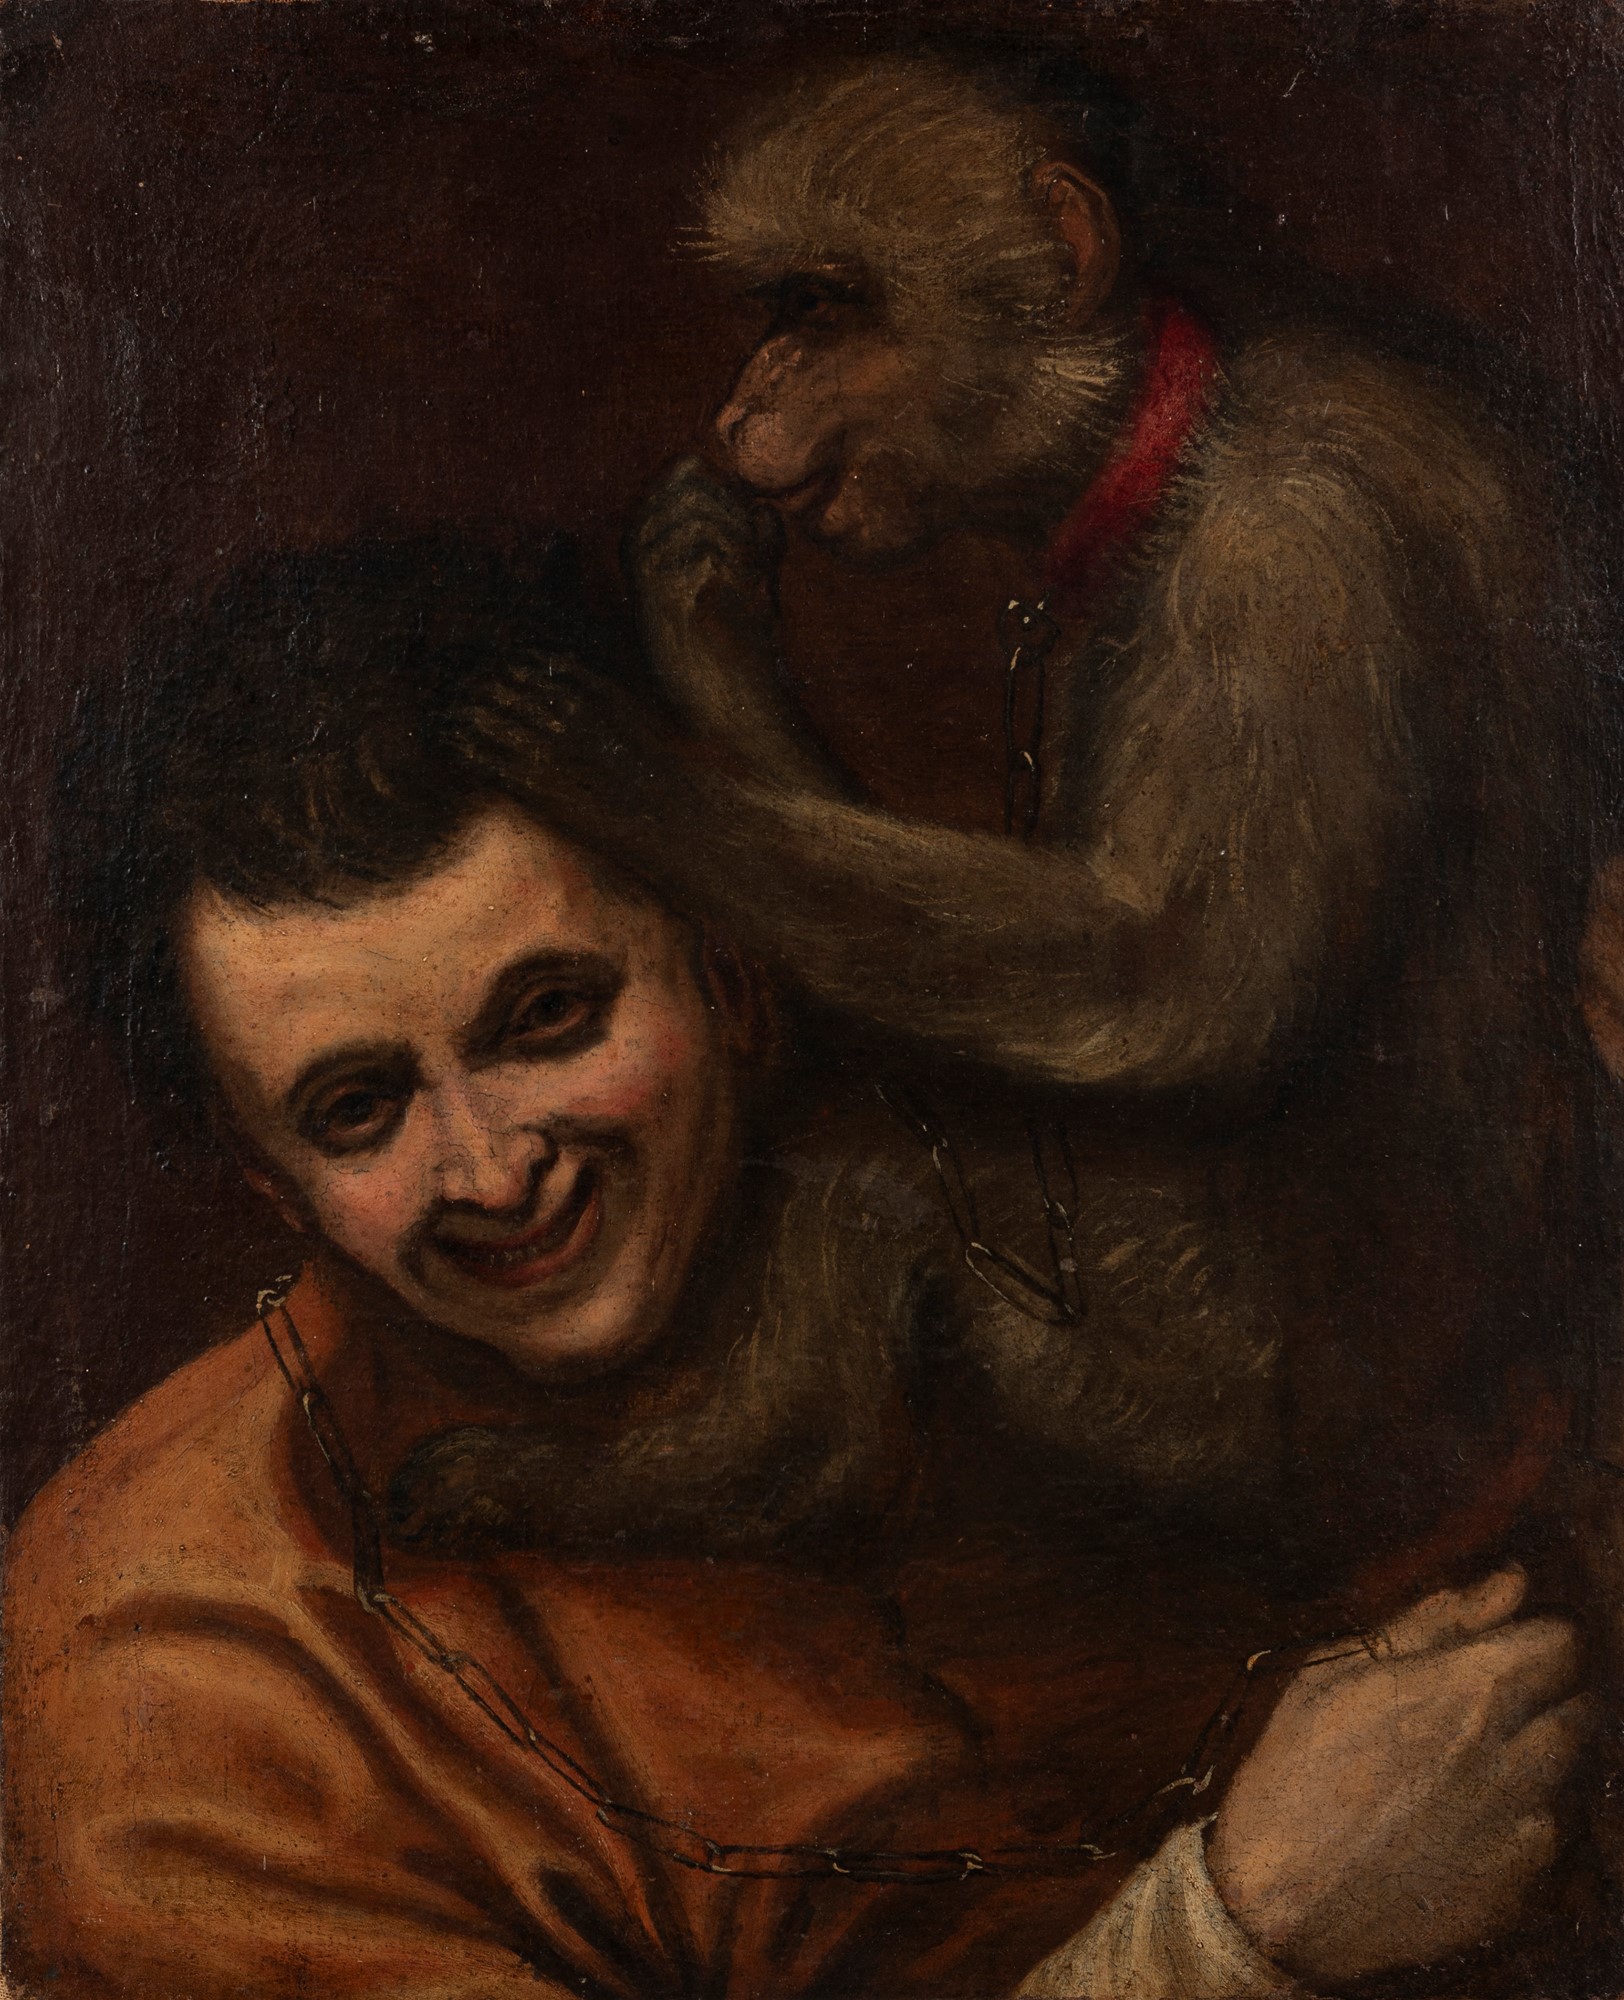 Italian School of the Eighteenth Century, by Annibale Carracci - Portrait of man with monkey